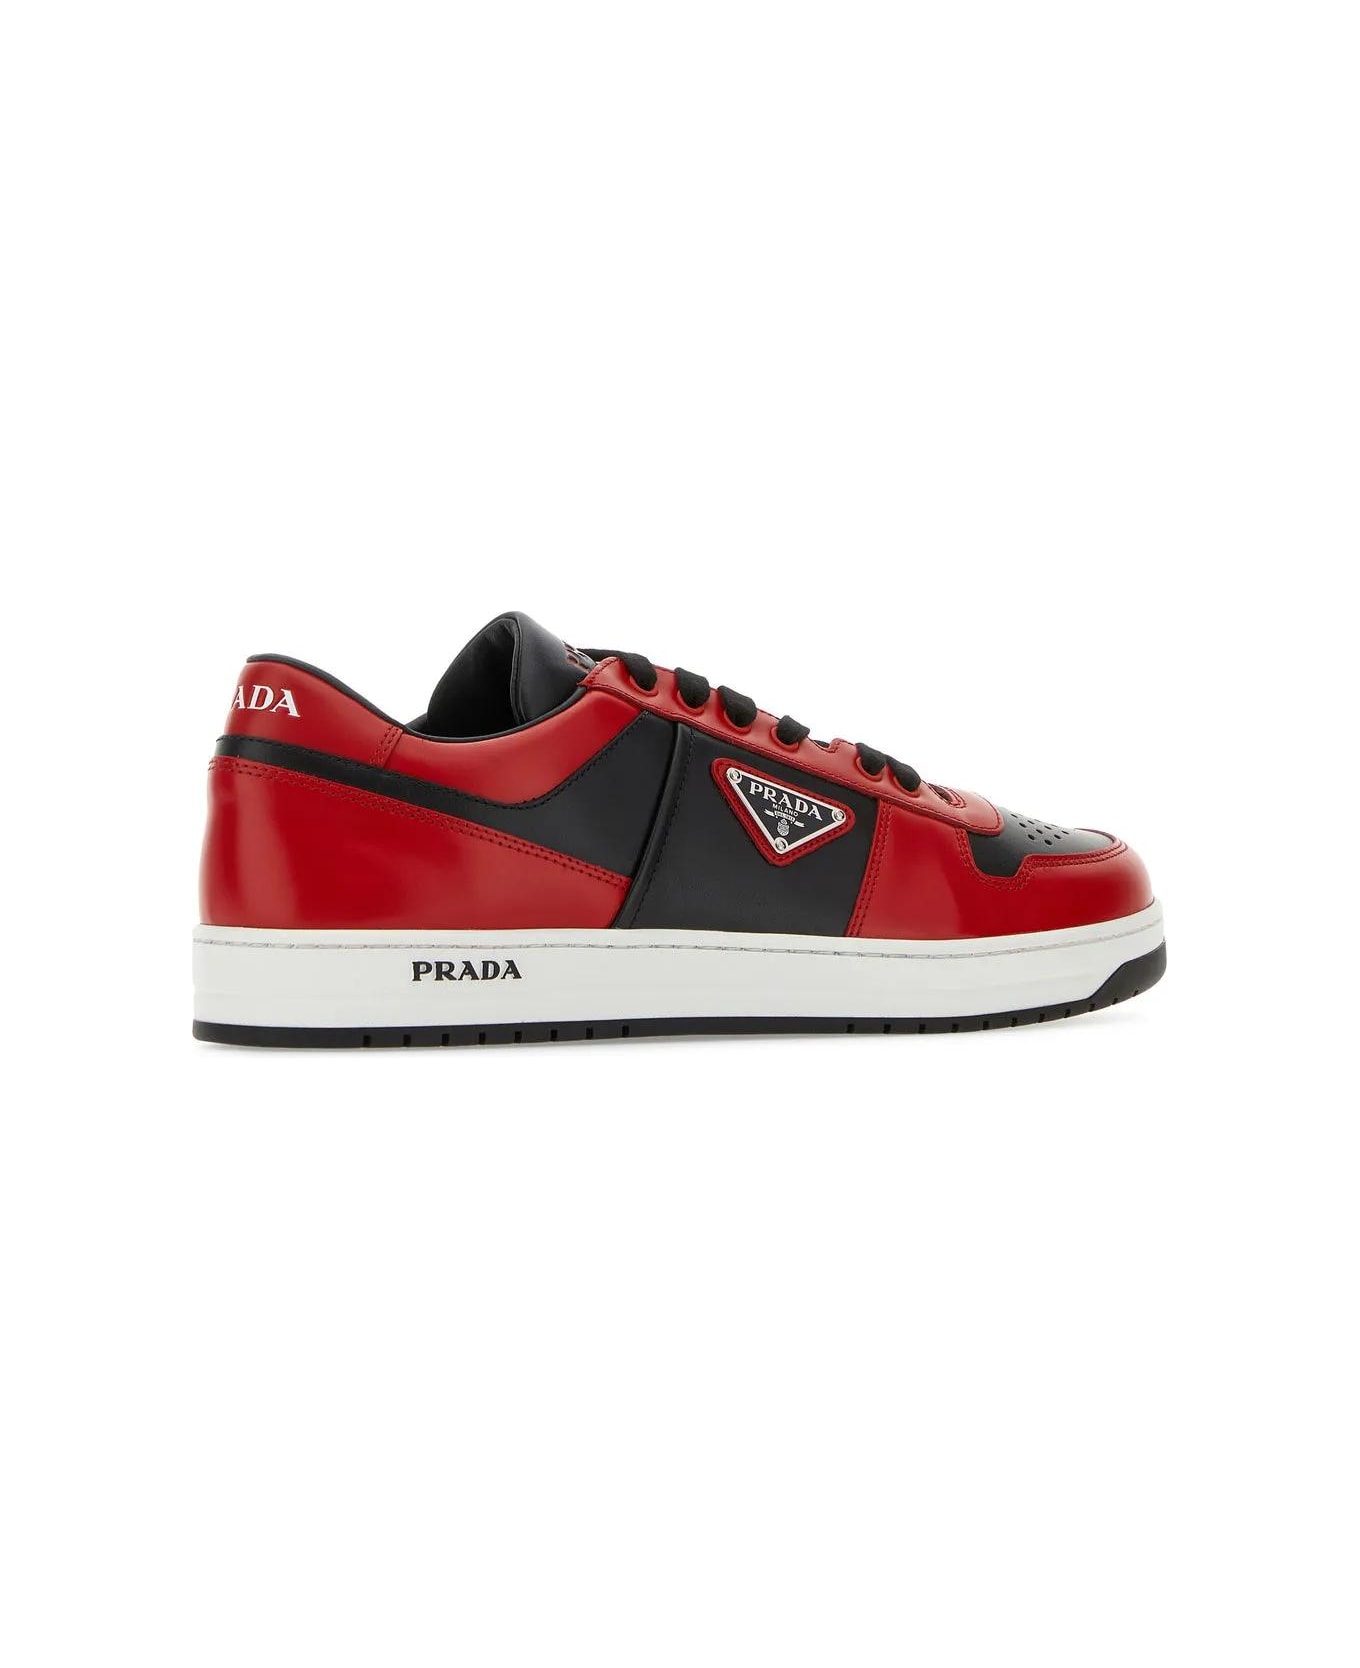 Prada Two-tone Leather Downtown Sneakers - NERO+LACCA スニーカー